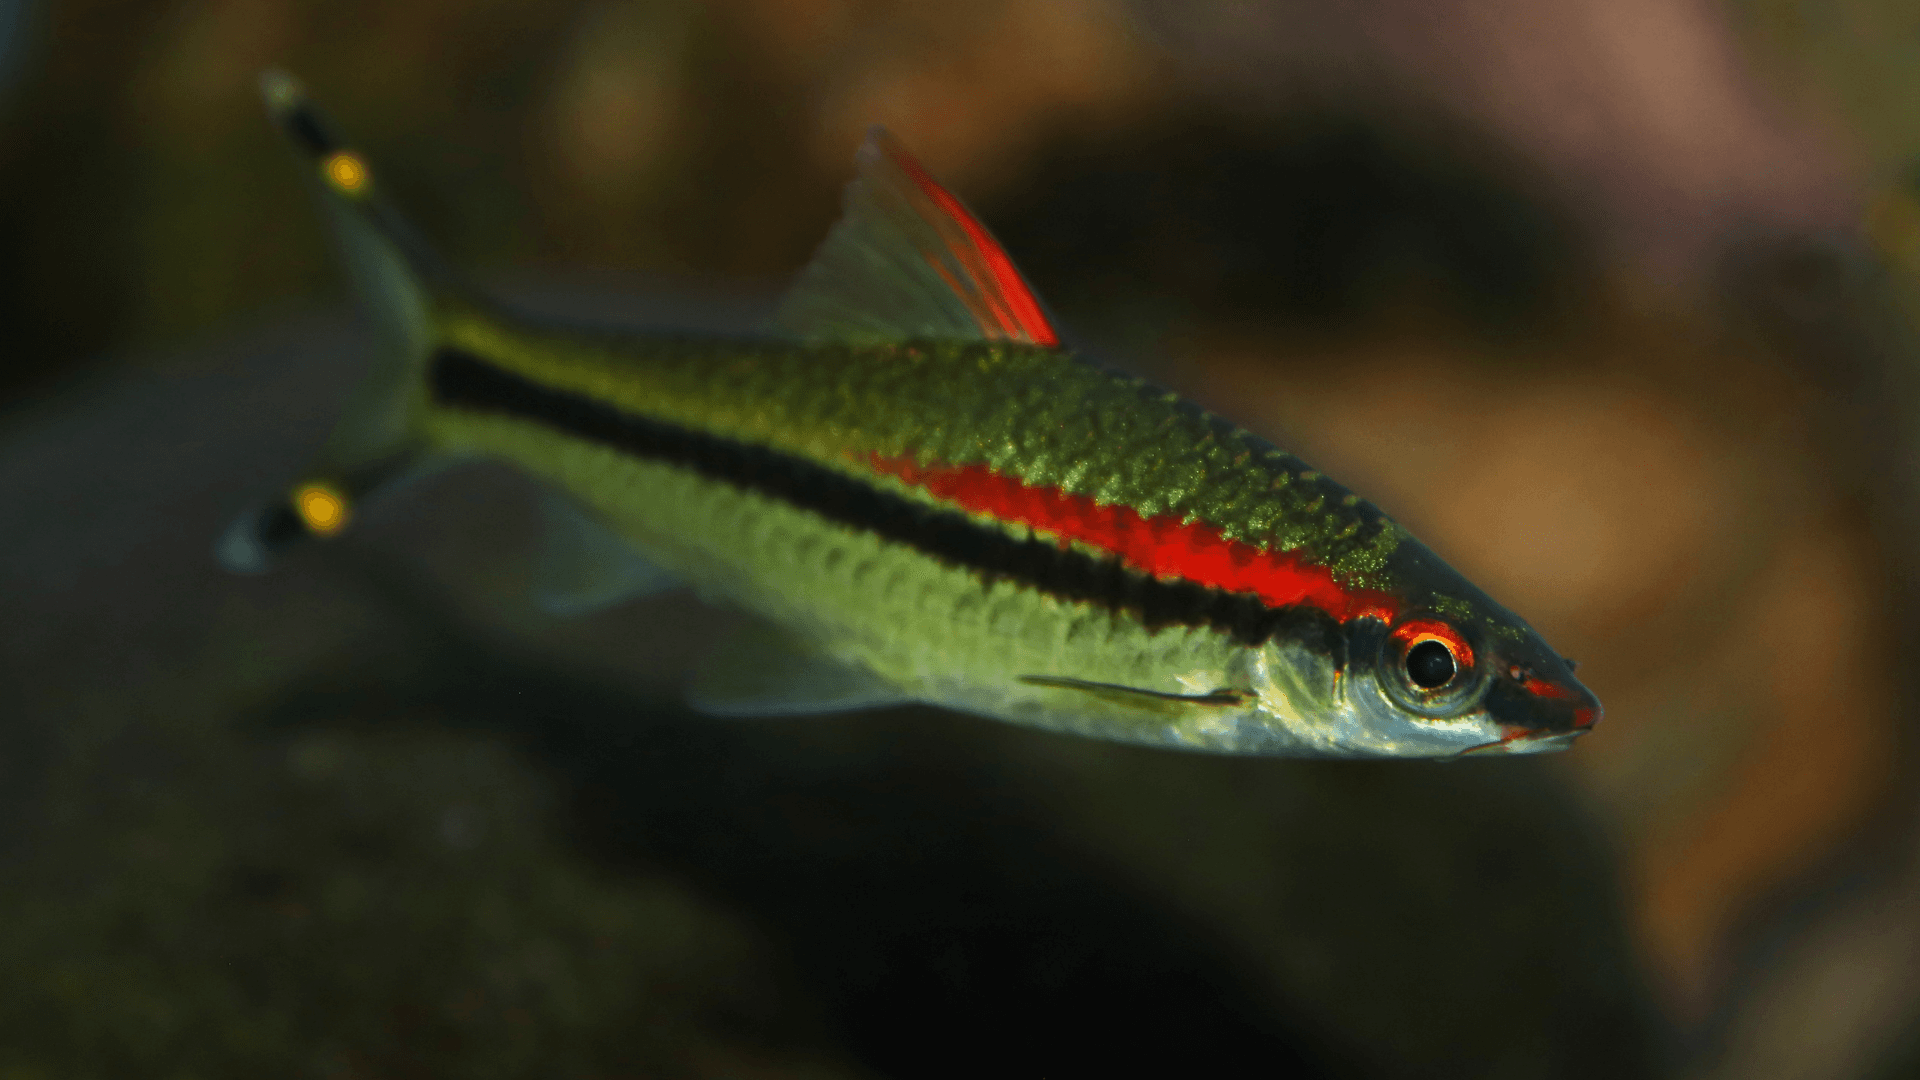 A photo of Small Fish That Resist Captivity